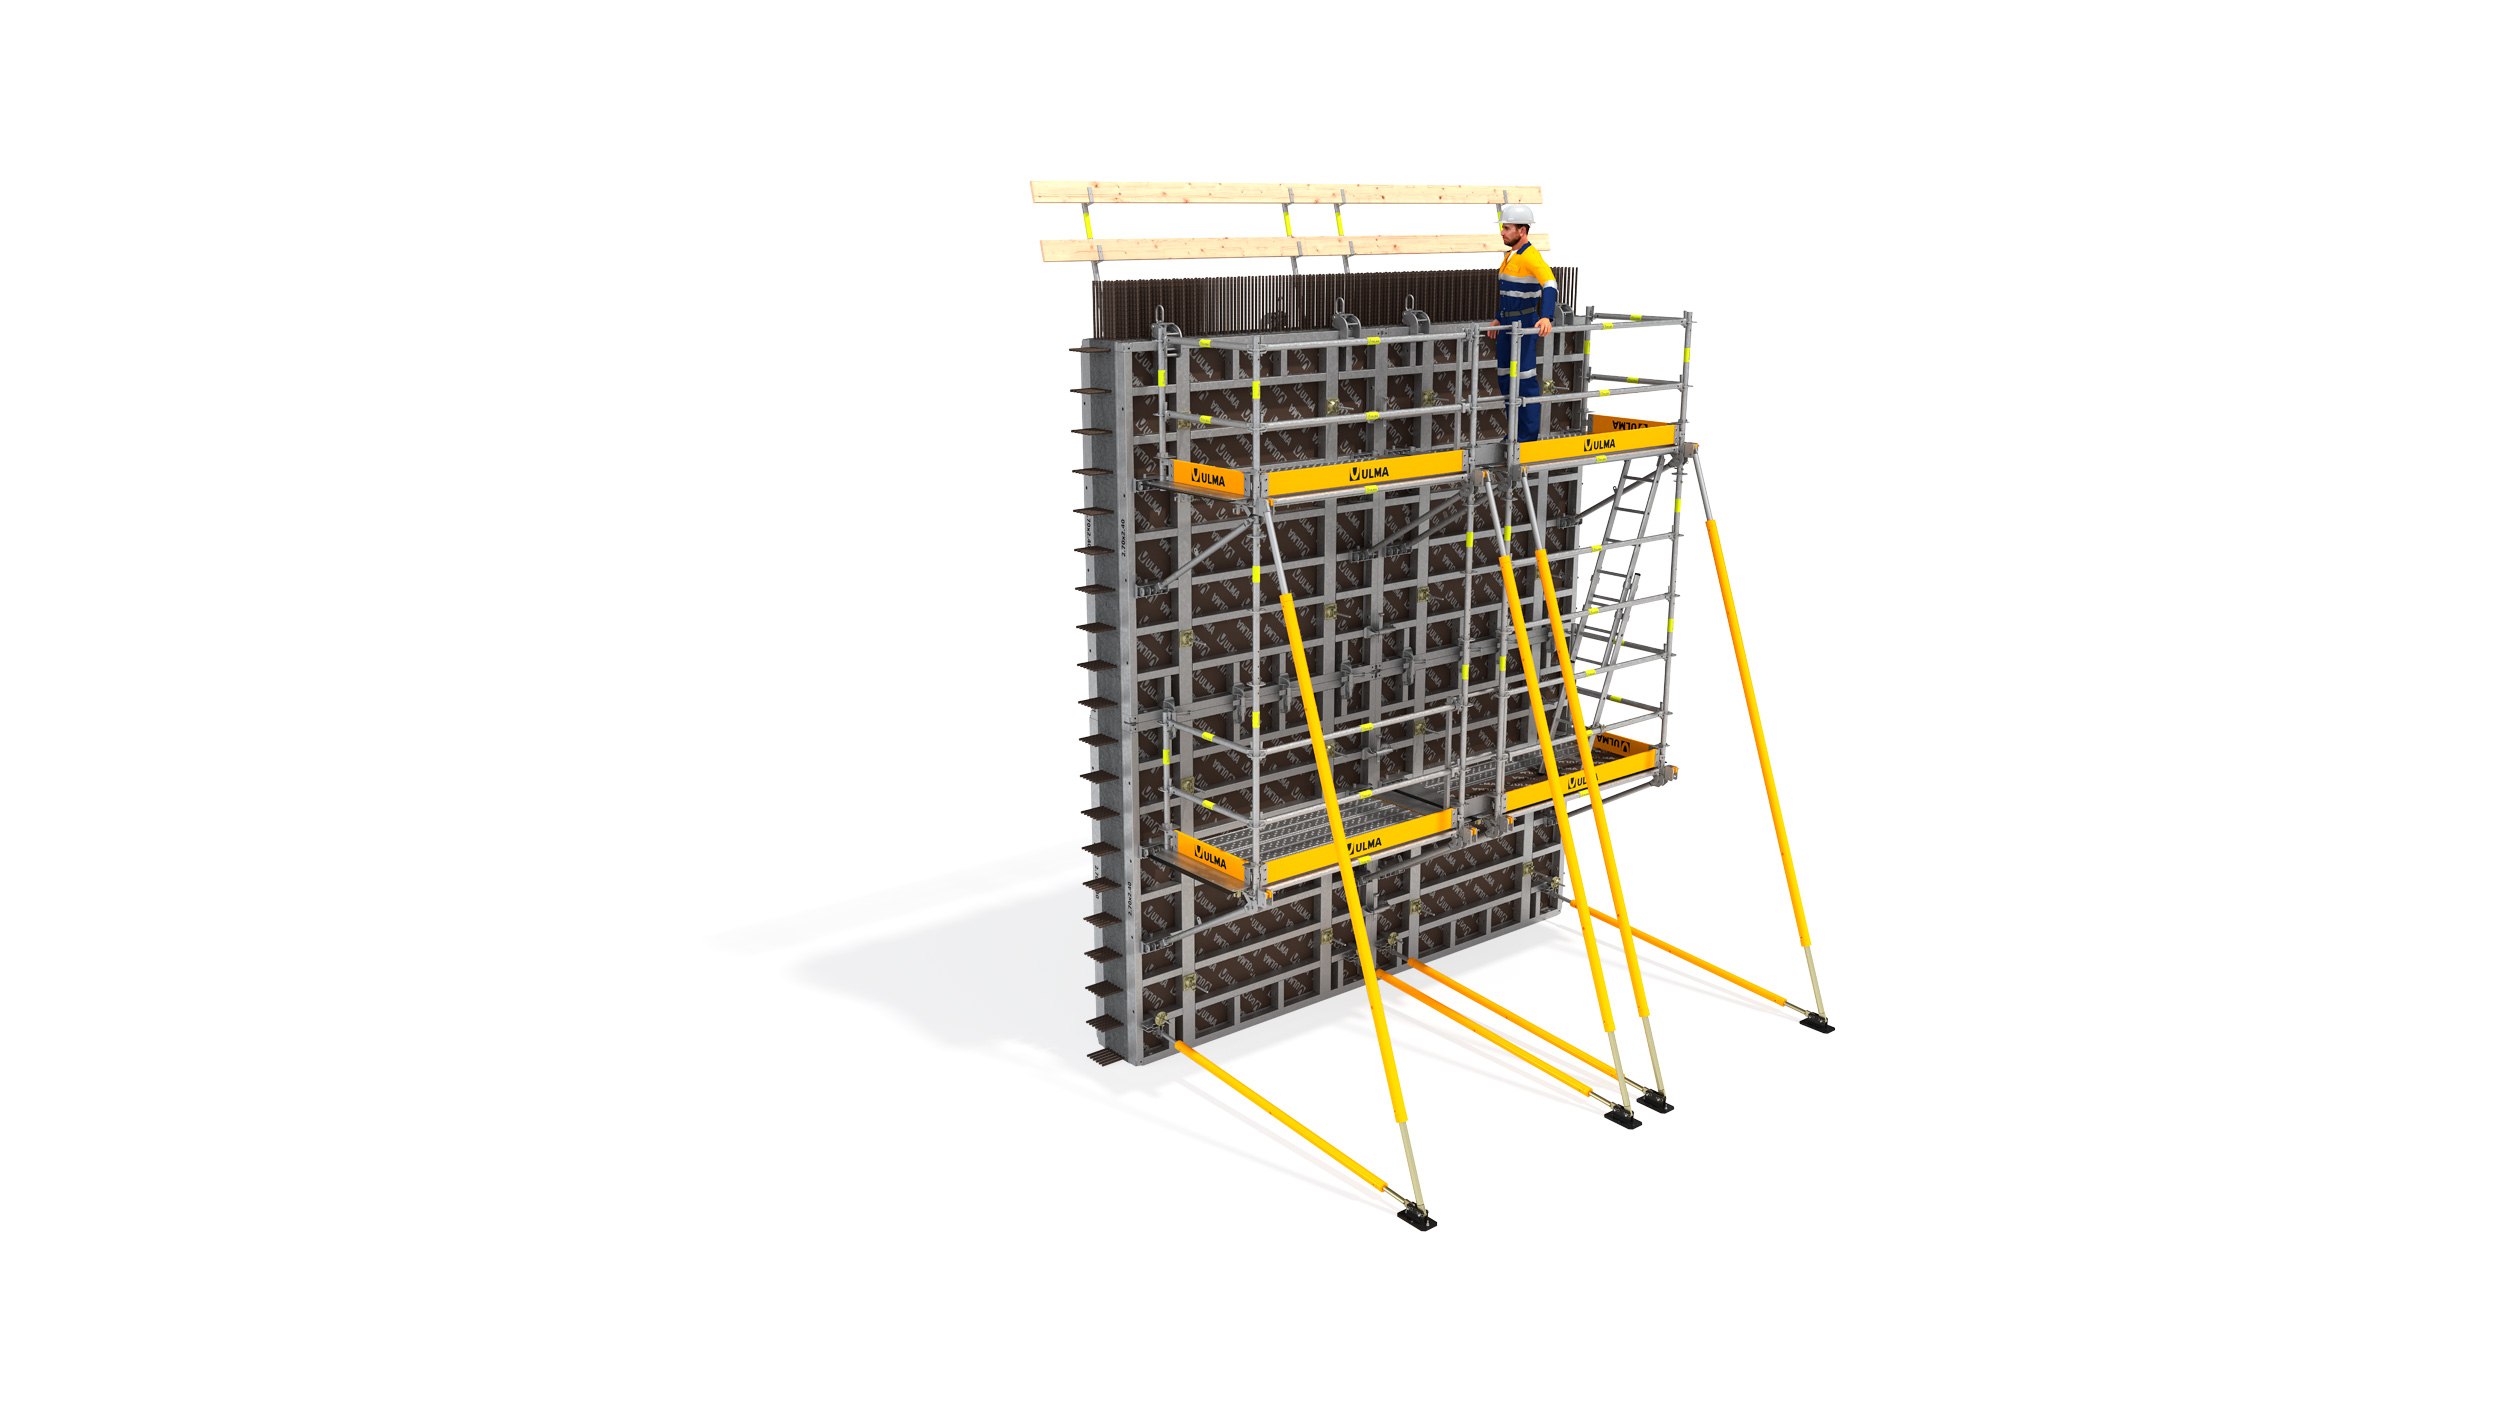 Modular safety platform, adaptable to different geometries. It can be assembled on the ground. Easy transport and storage.